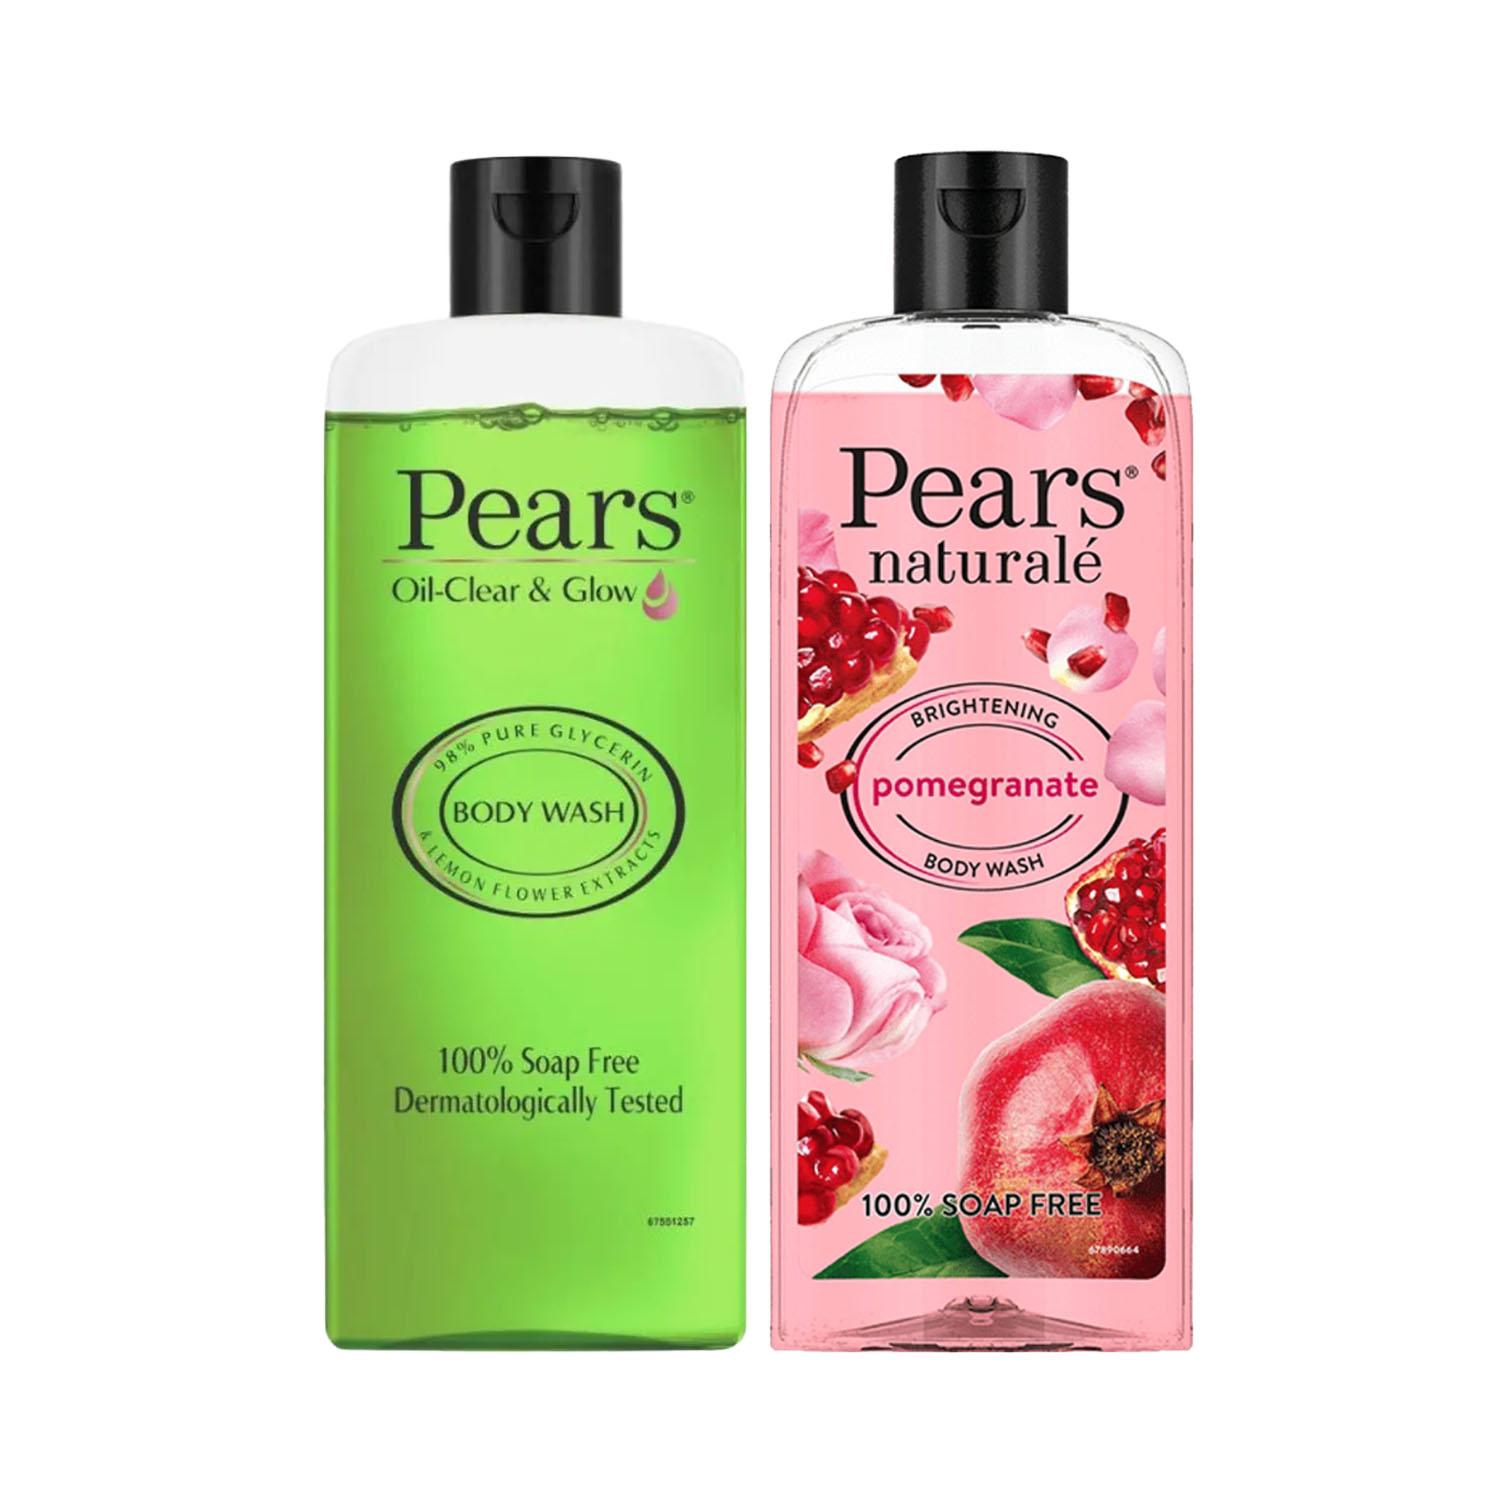 Pears | Pears Oil Clear & Glow And Naturale Brightening Pomegranate Body Wash Combo